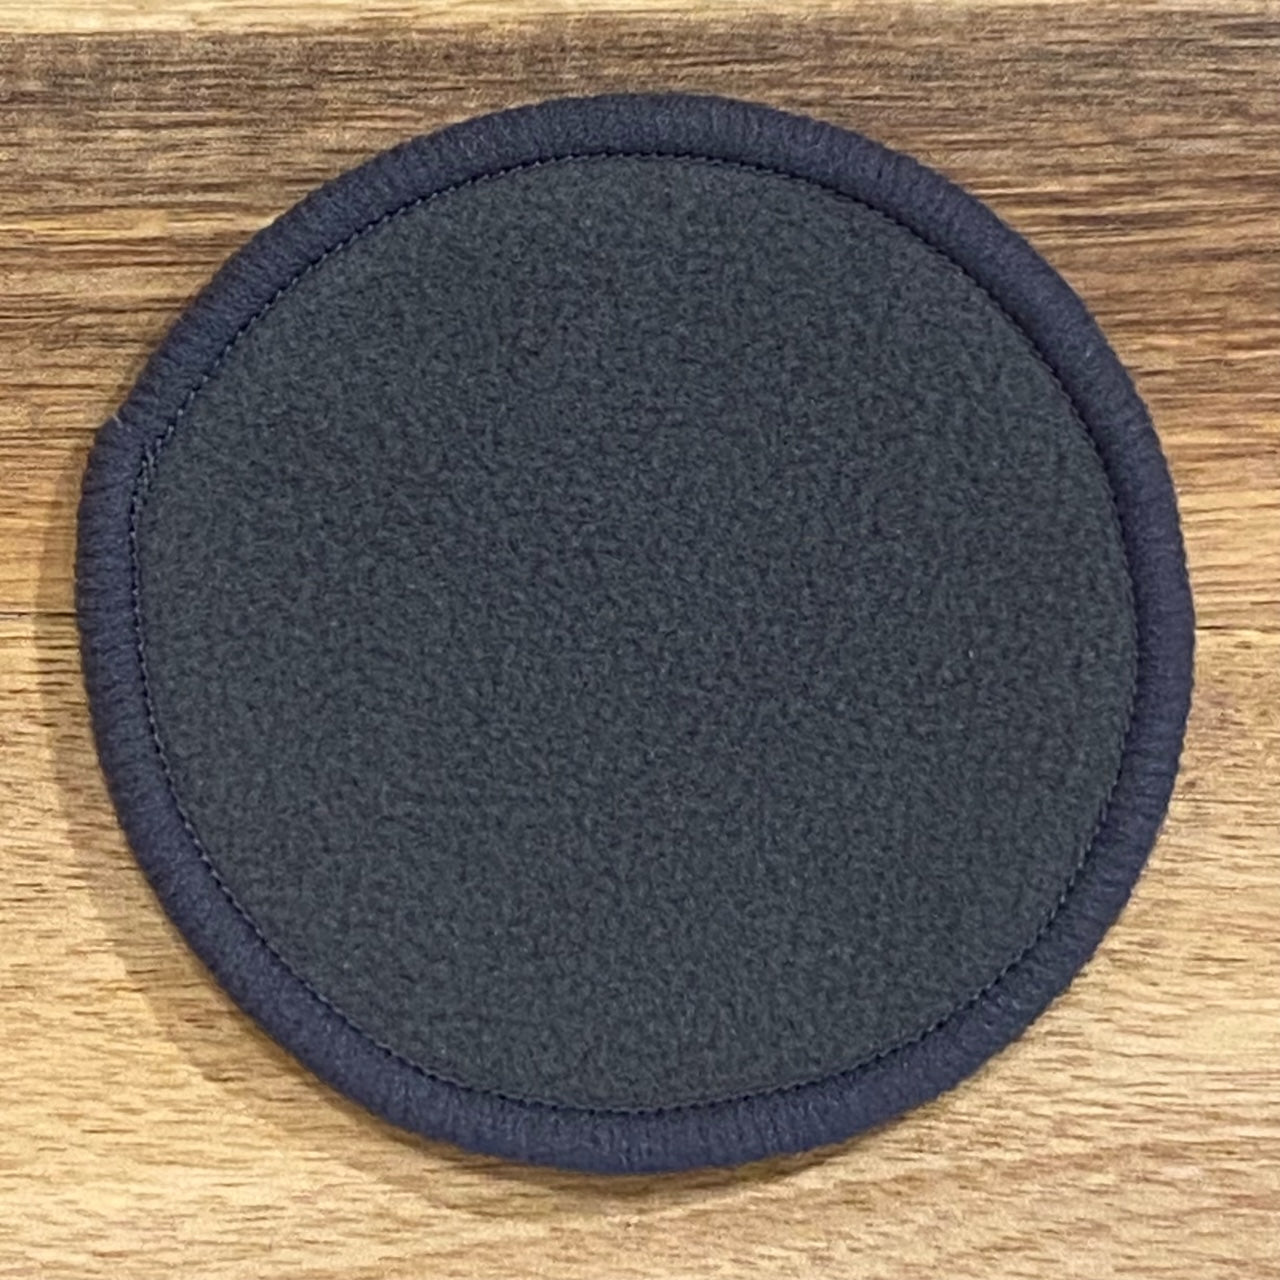 Reusable Makeup Pad Remover - Bamboo Charcoal - Off the Bottle Refill Shop